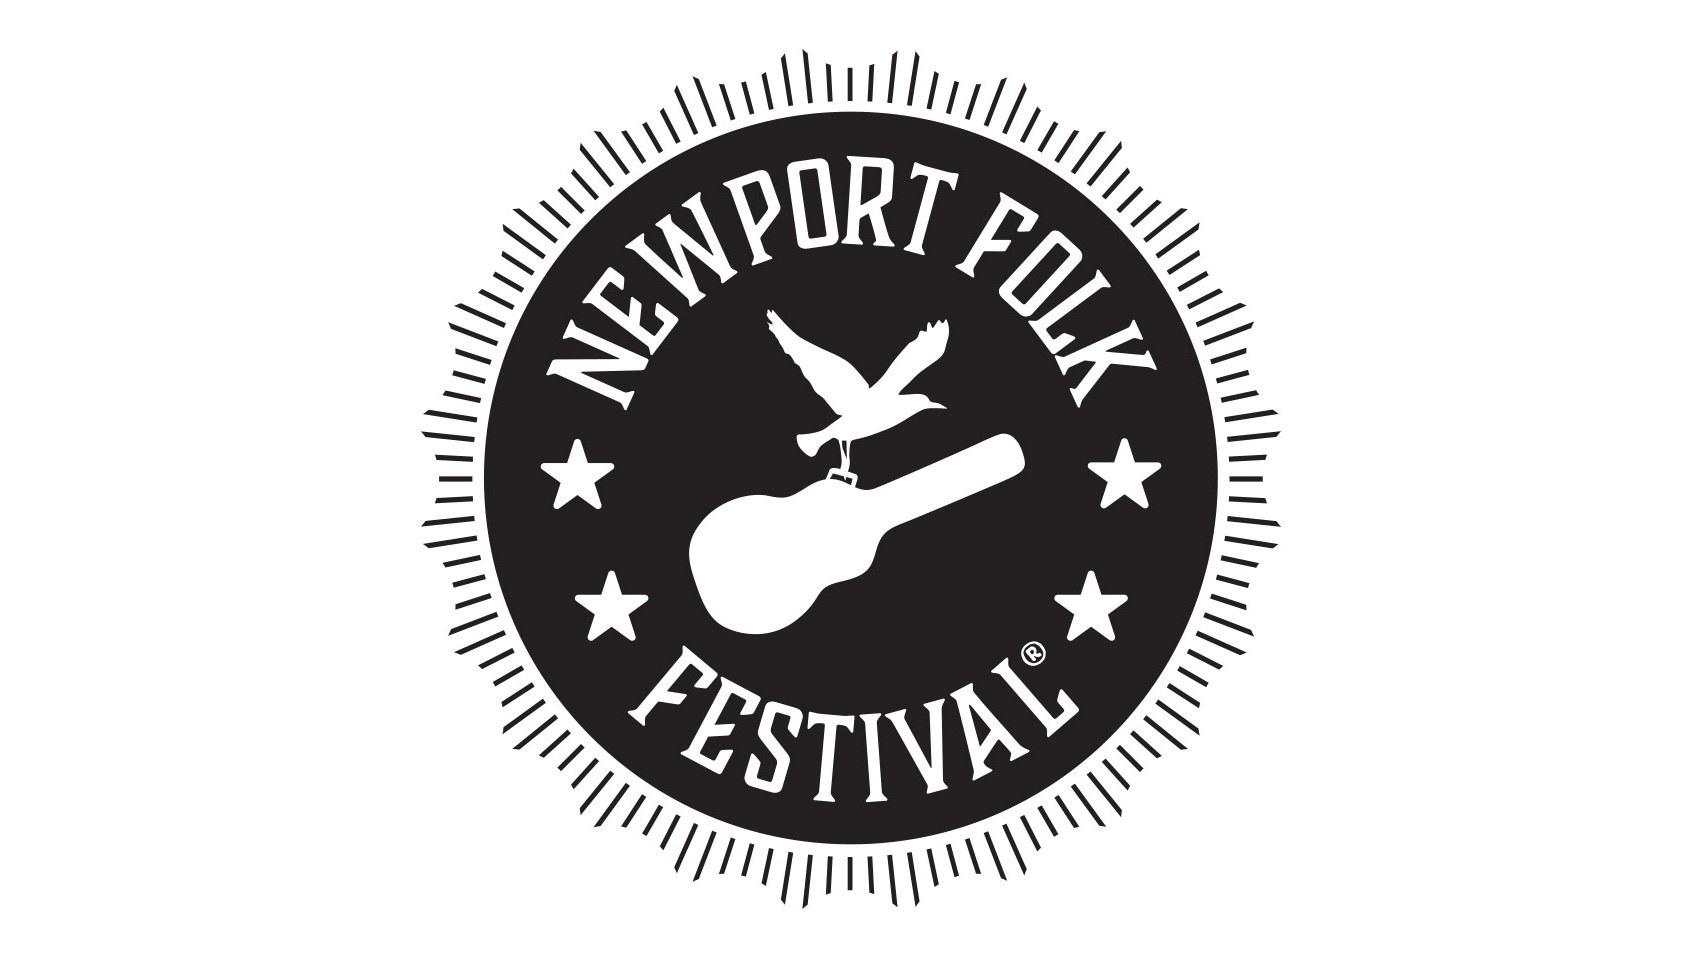 Newport Logo - Newport Folk Festival Adds Alone & Together To 2017 Lineup